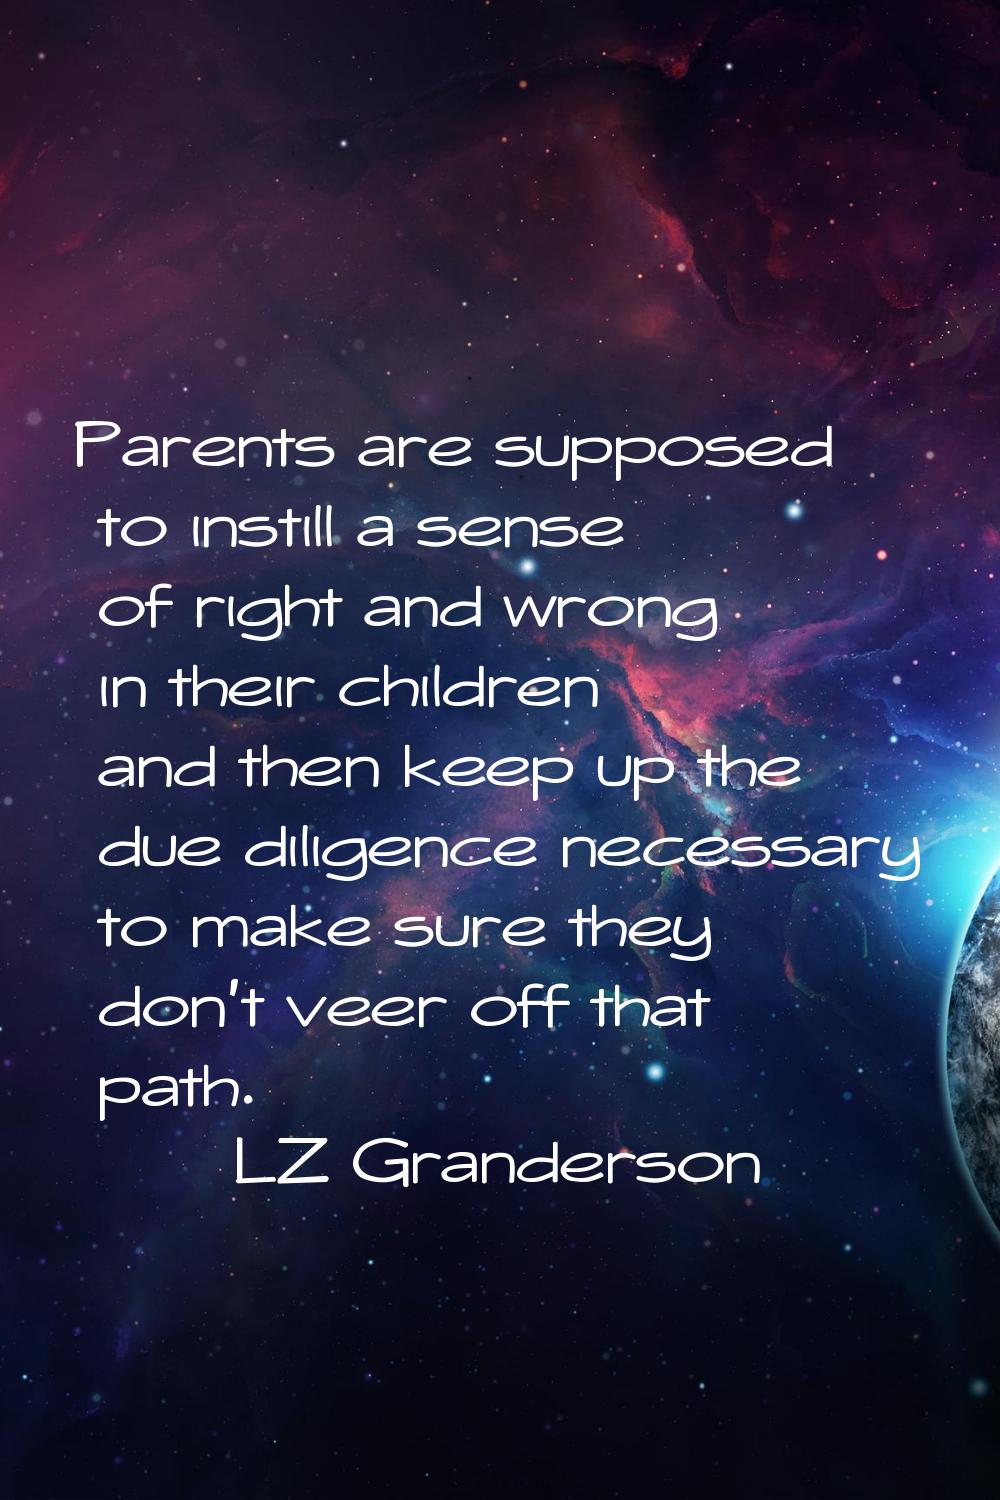 Parents are supposed to instill a sense of right and wrong in their children and then keep up the d